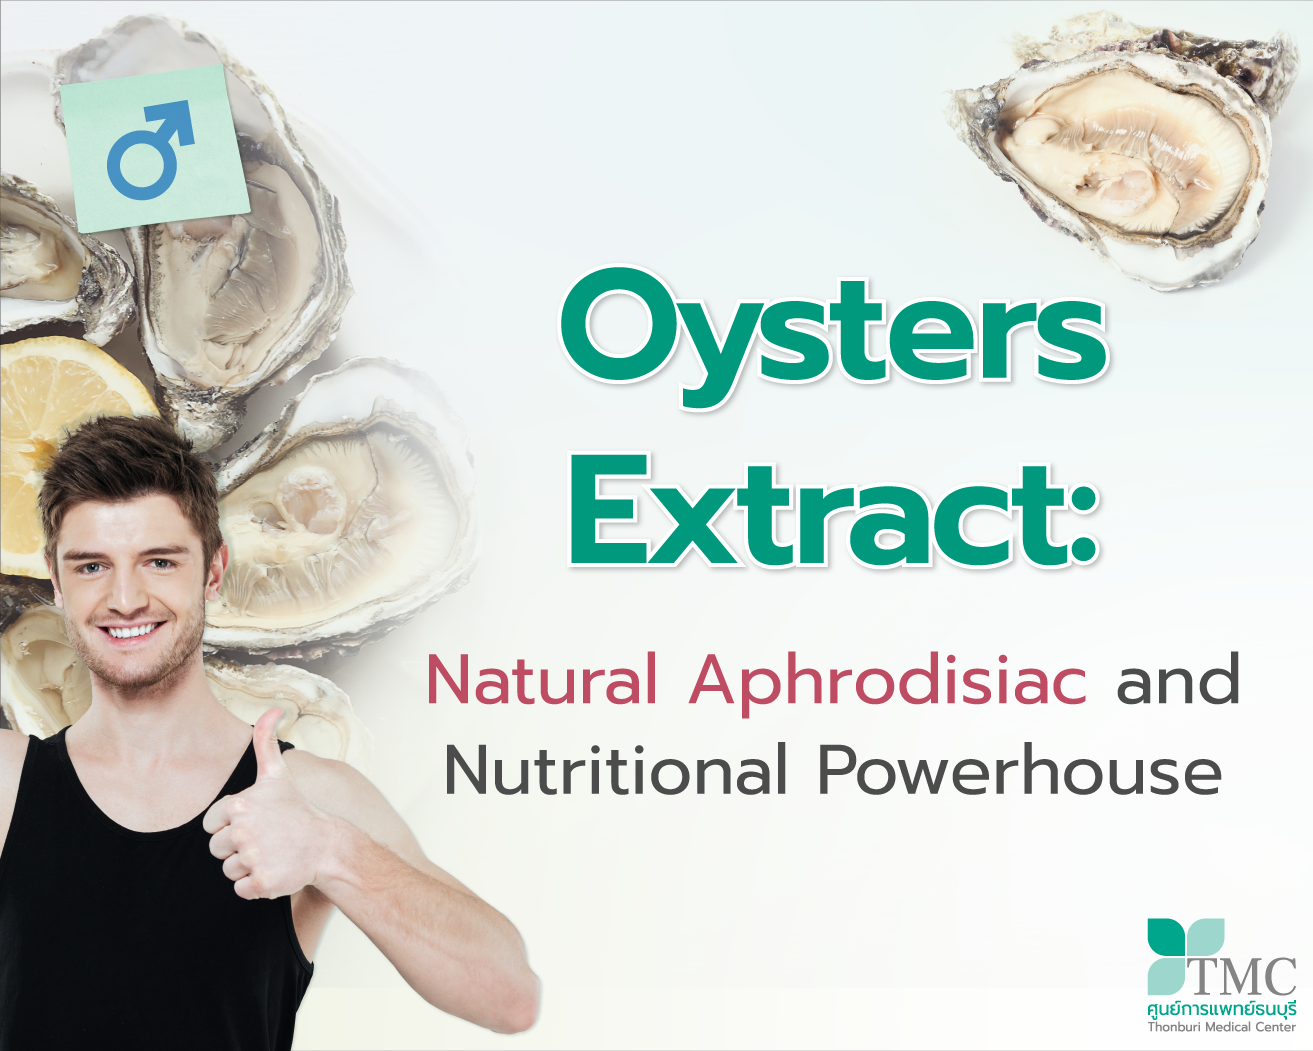 Oysters Extract: Natural Aphrodisiac and Nutritional Powerhouse